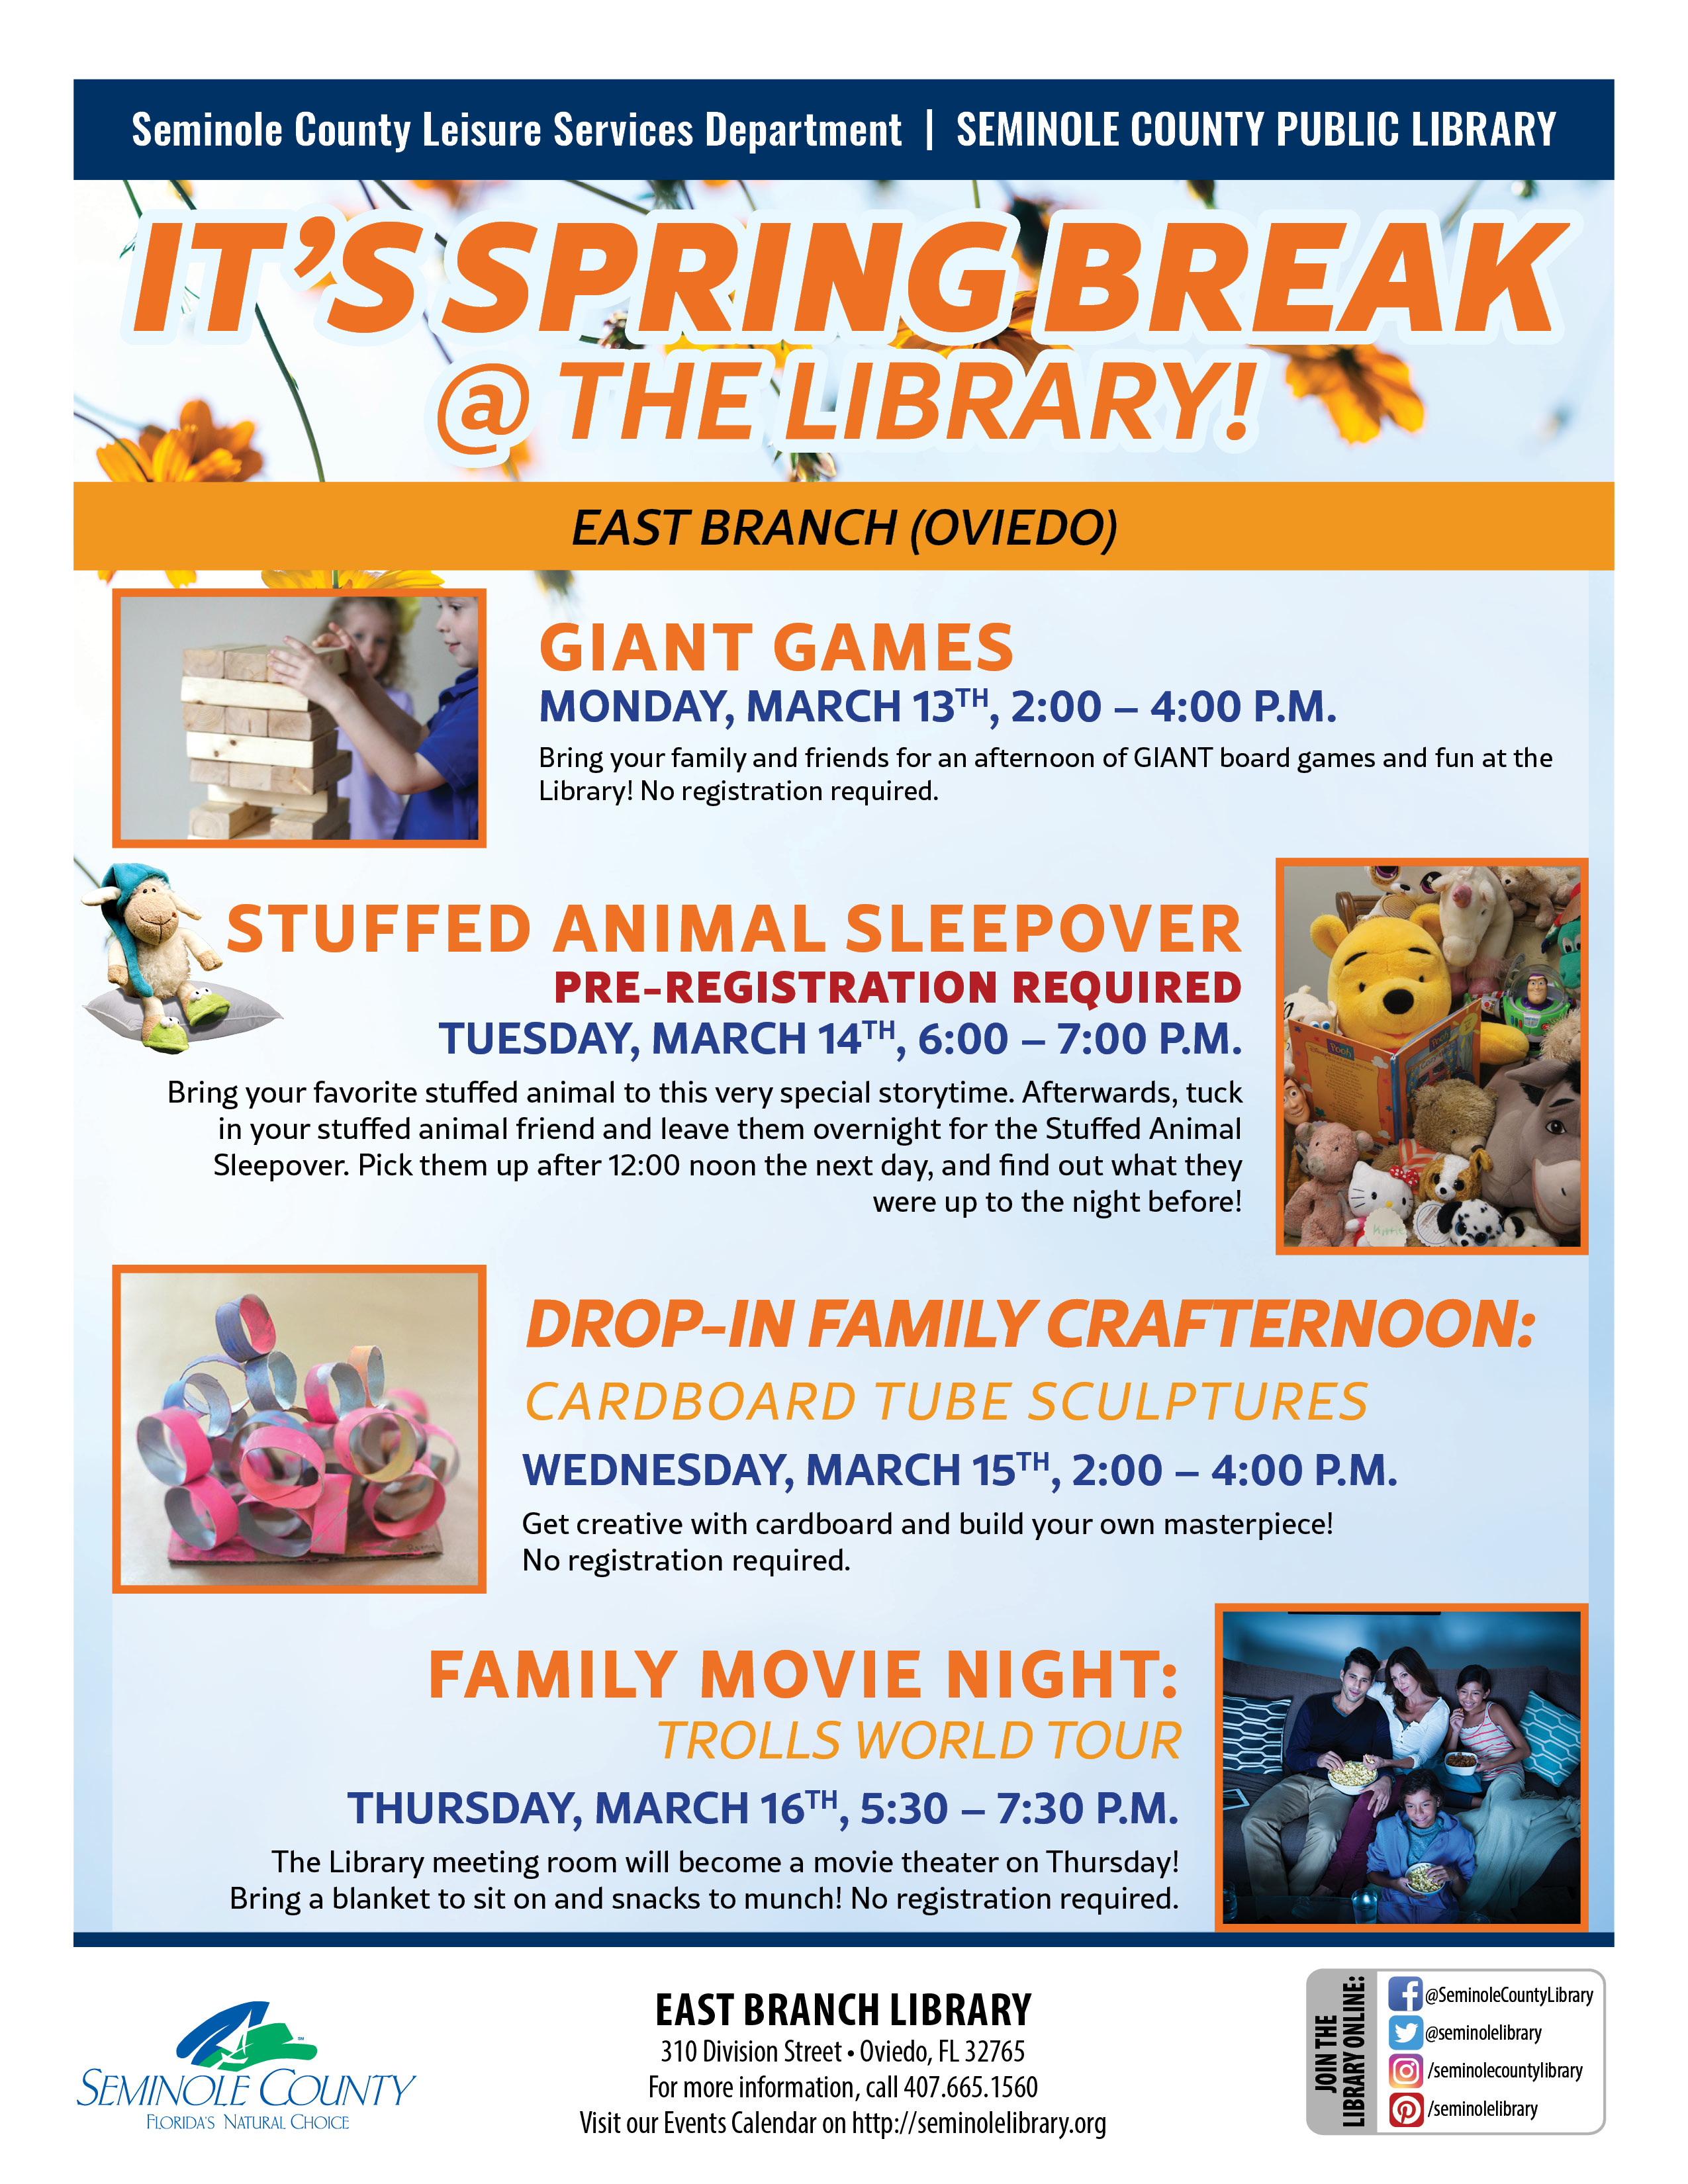 Spring Break at the East Branch Library